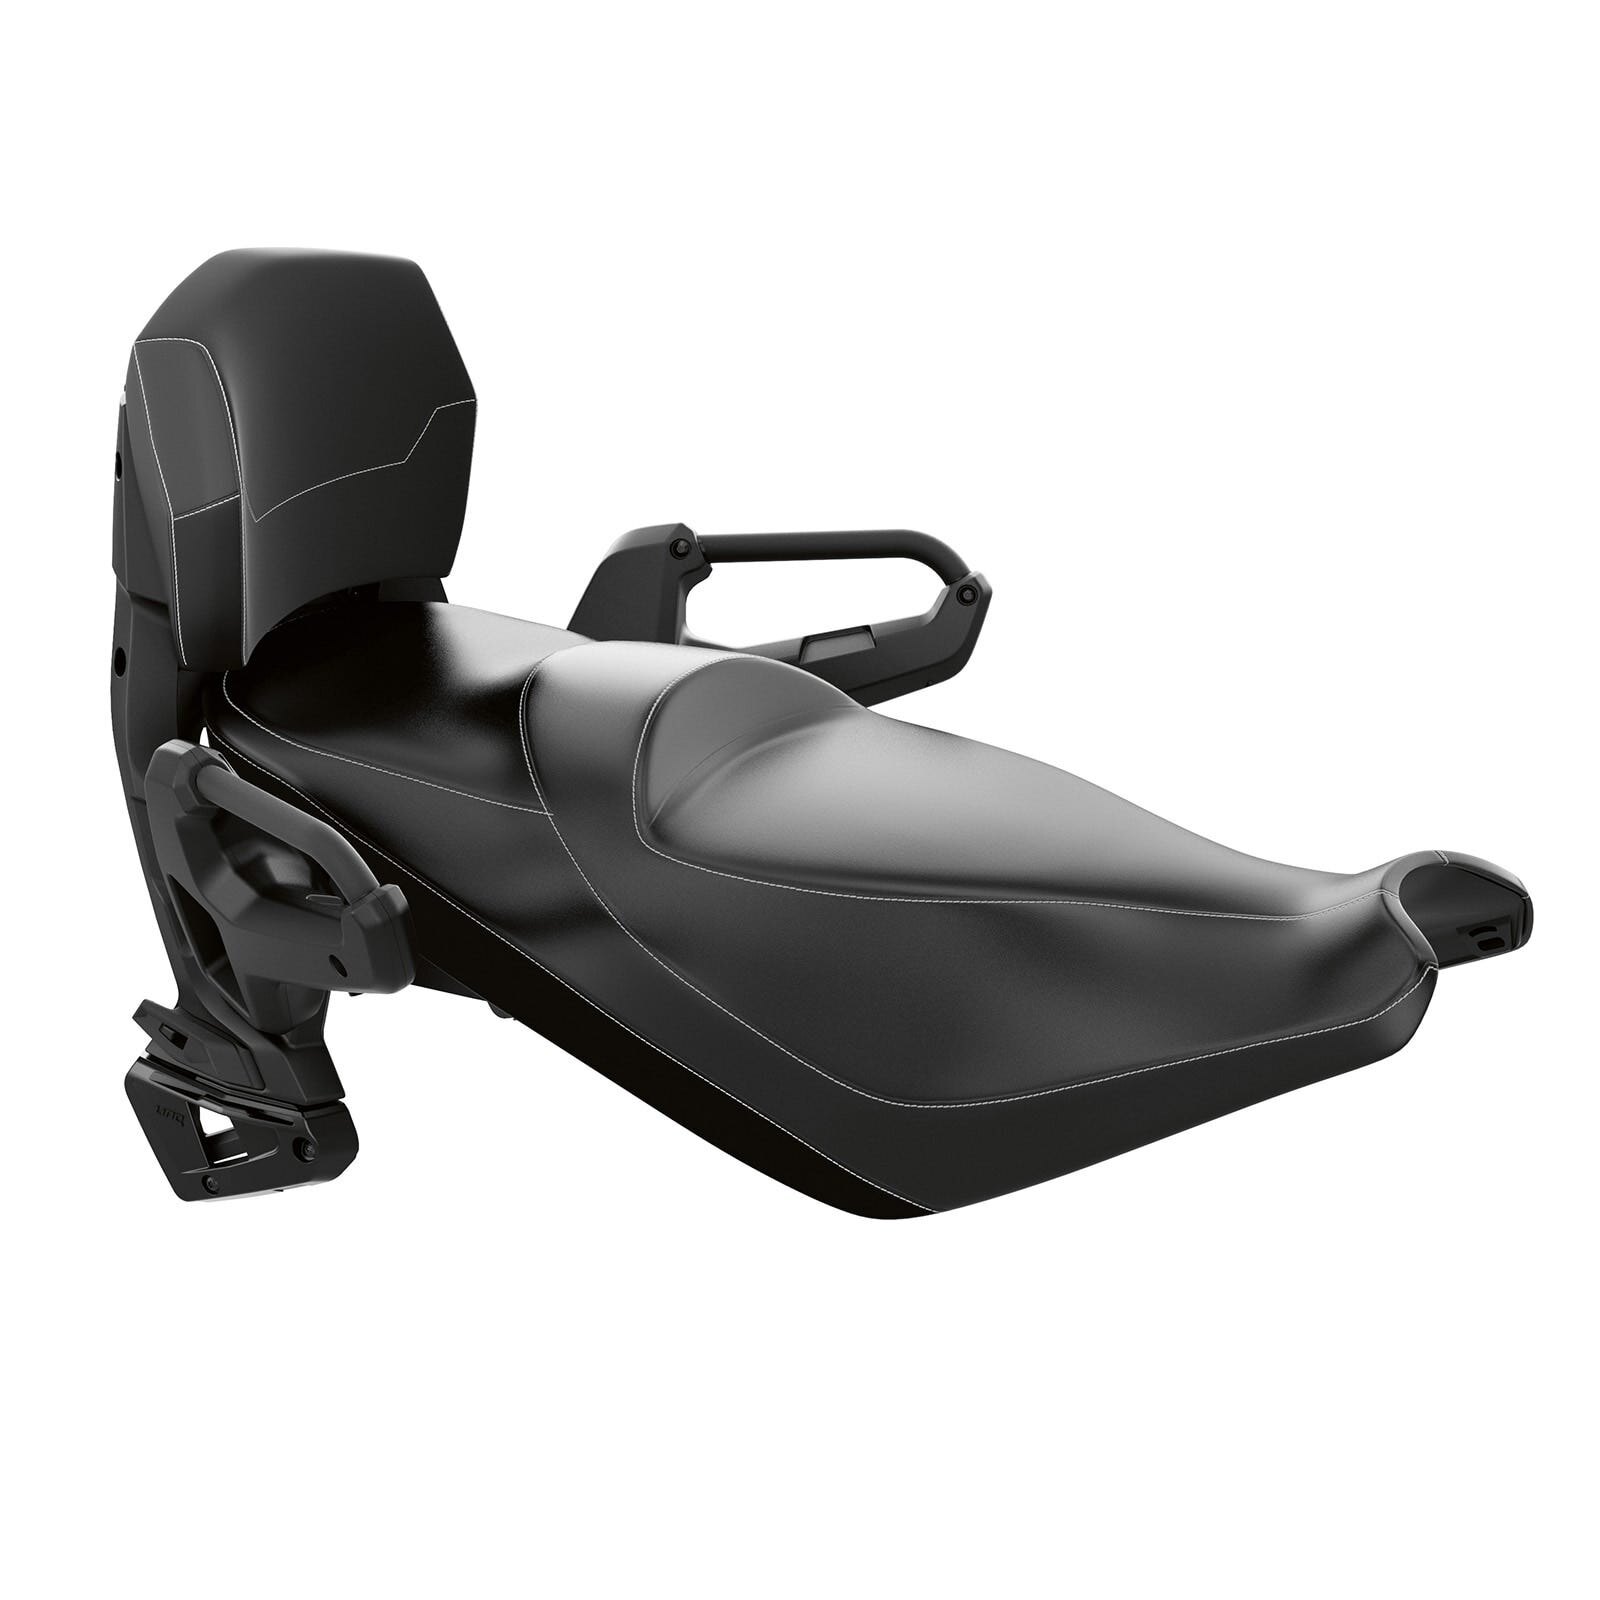 Trail LinQ 1 + 1 Seat with Backrest